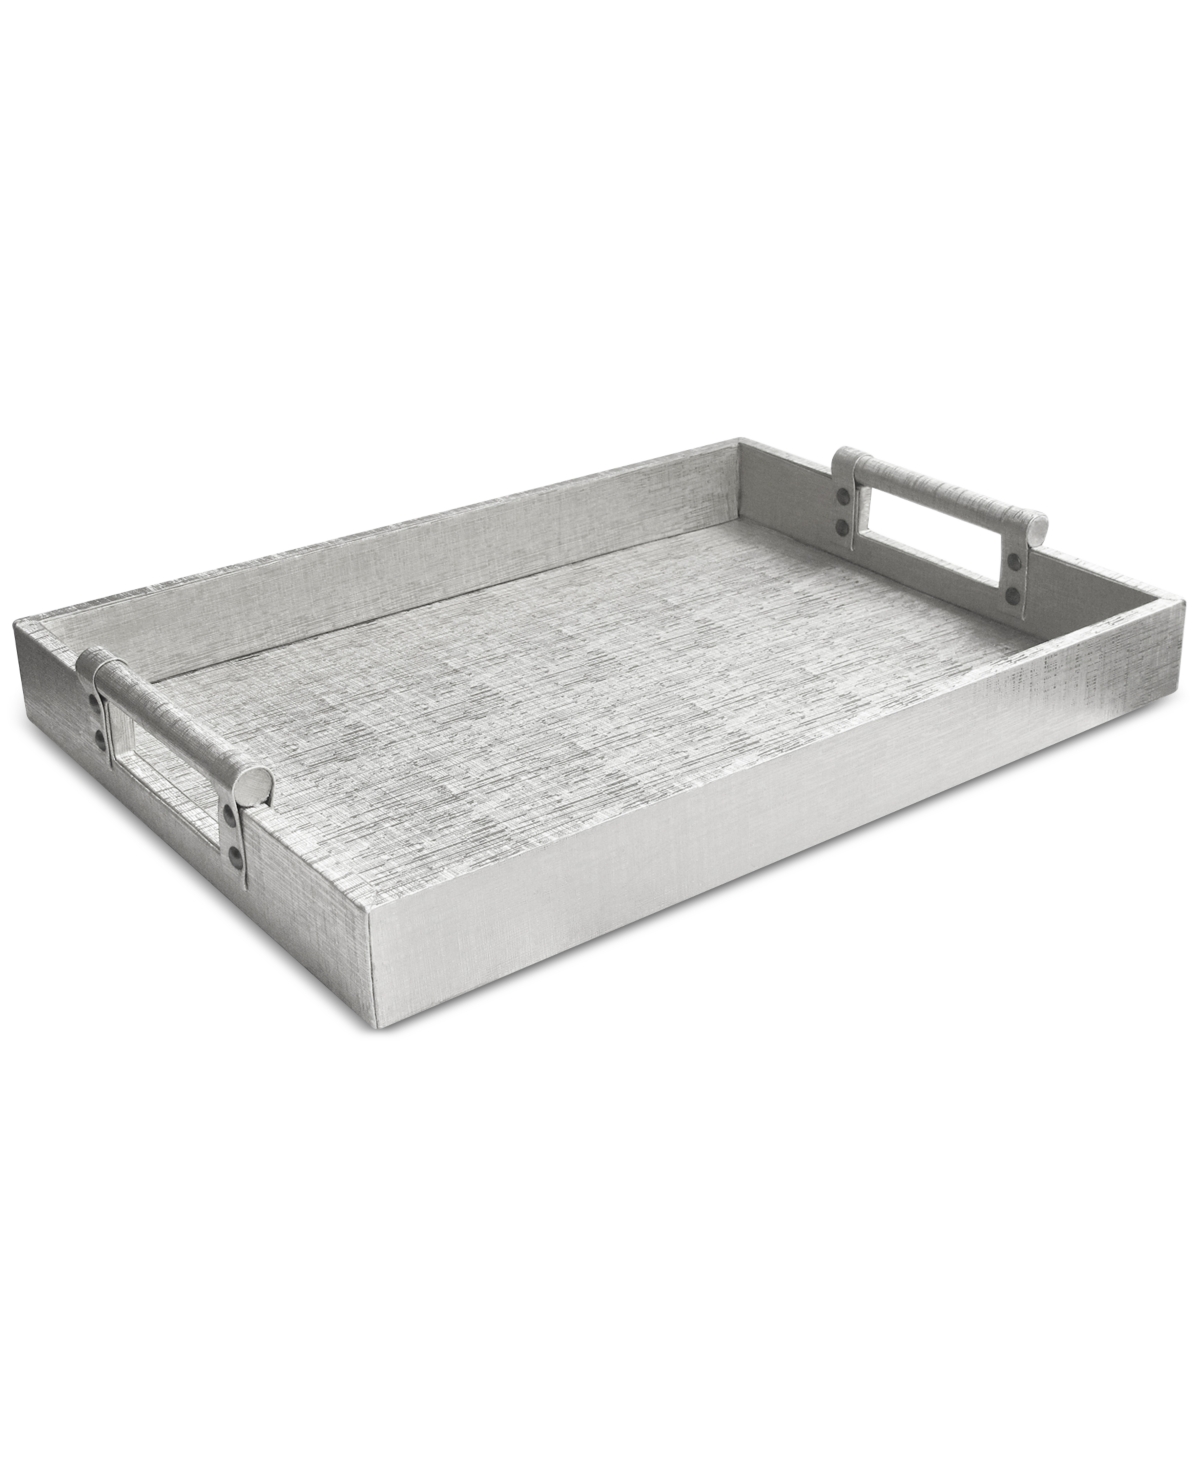 Jay Imports Faux-leather Rectangular Handled Tray In Silver